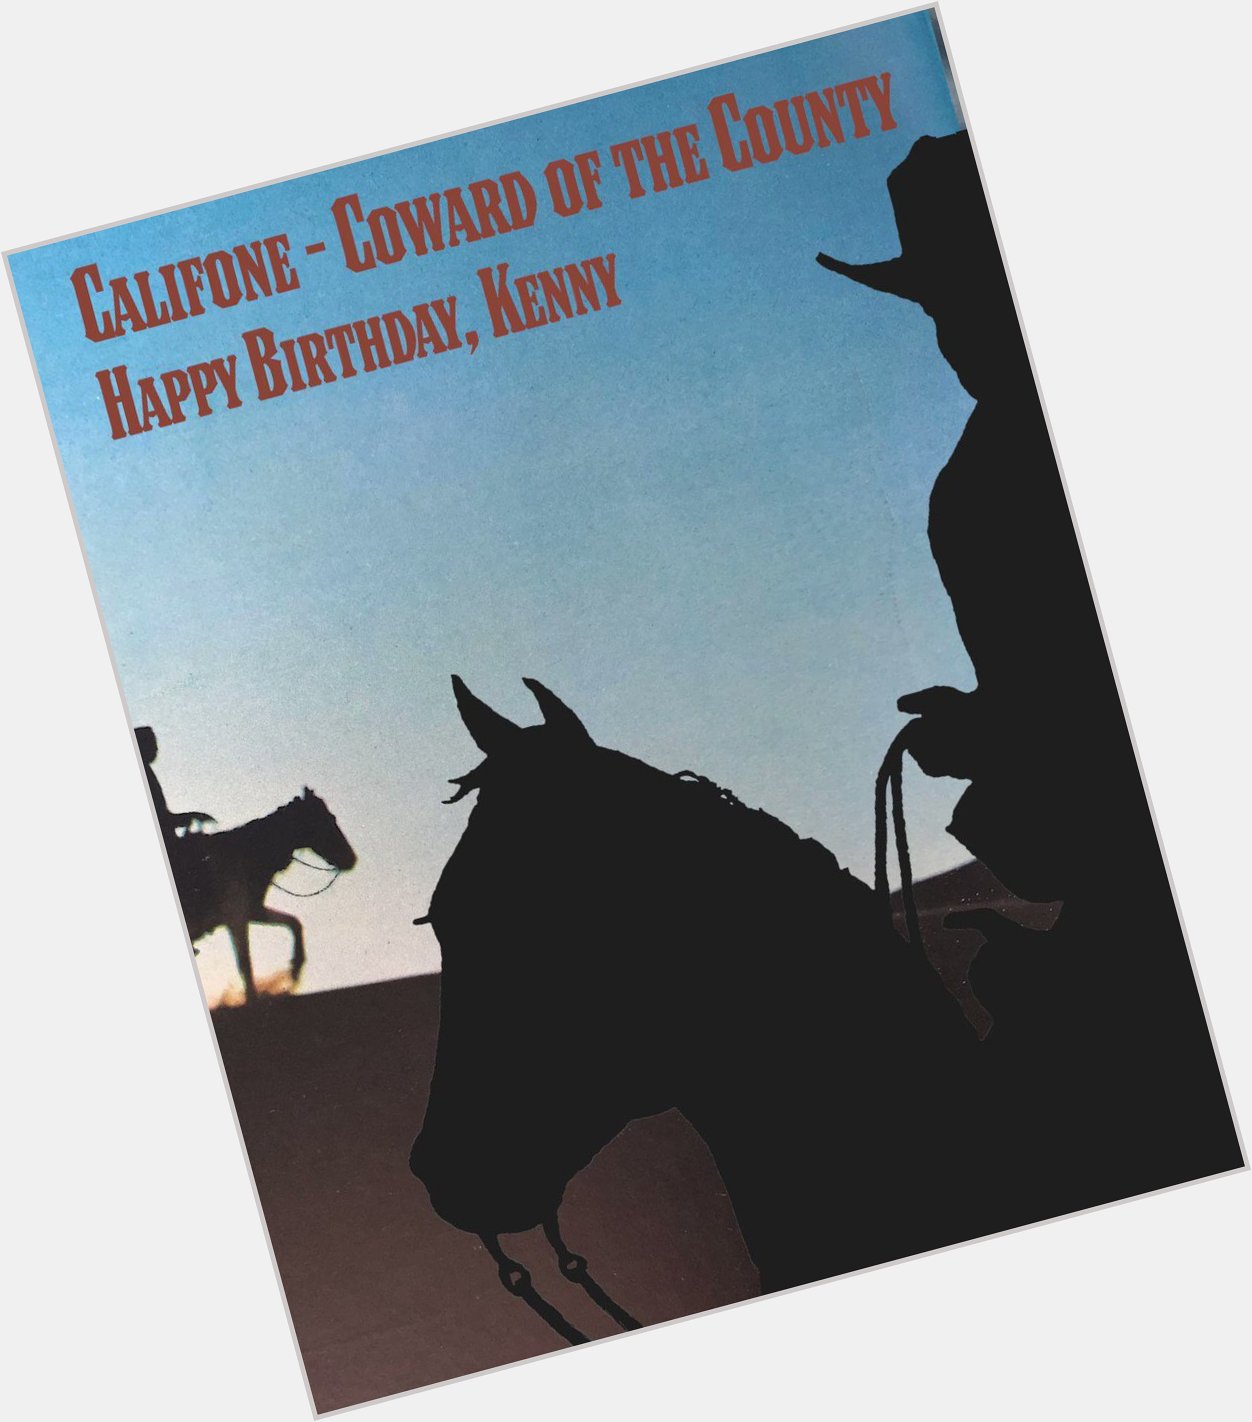 Califone // coward of the county.  mixed and made with the brilliant 